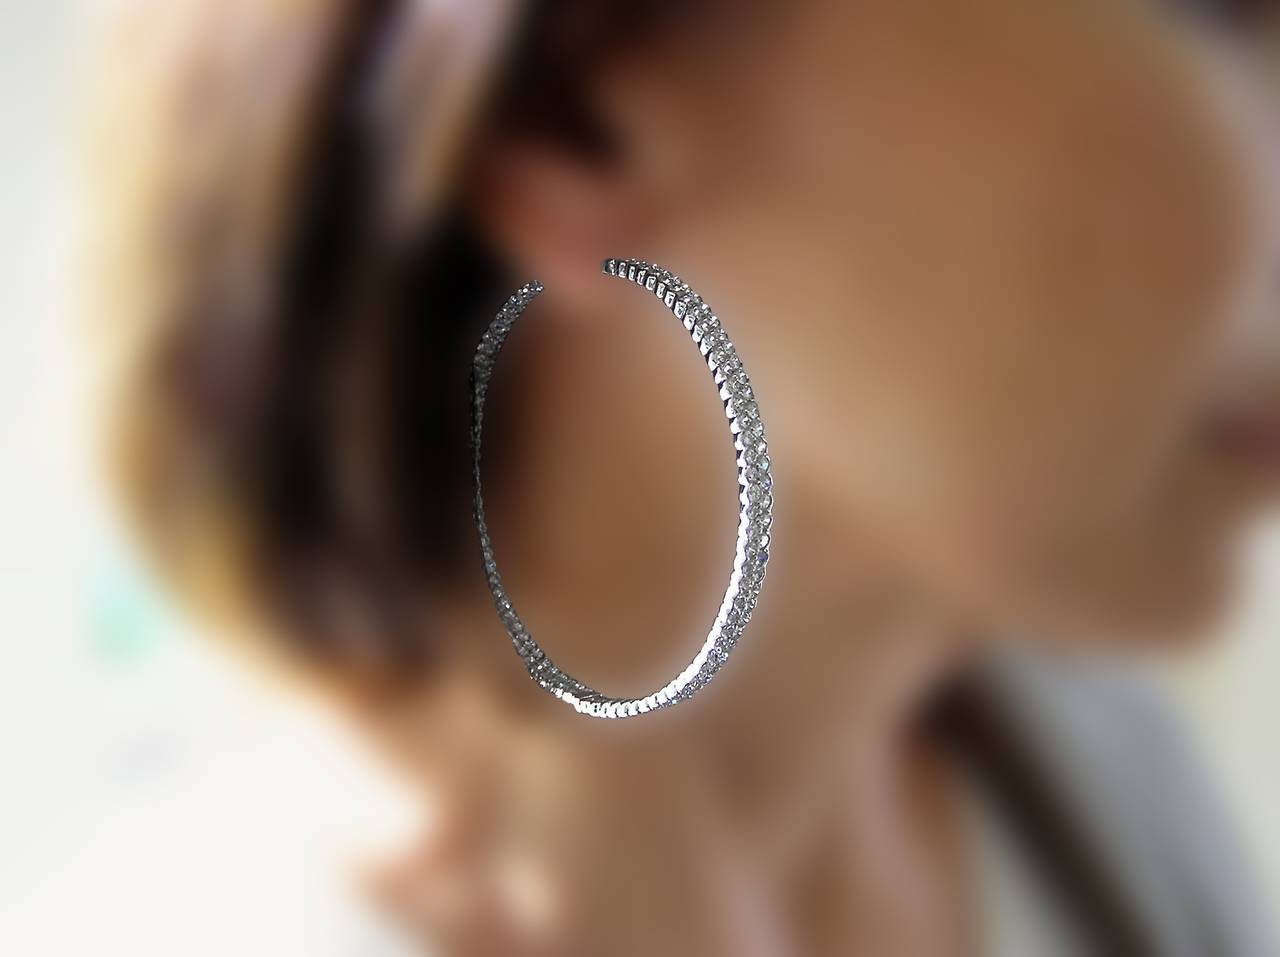 Grand Diamond Hoop Earrings In Excellent Condition For Sale In Newport Beach, CA